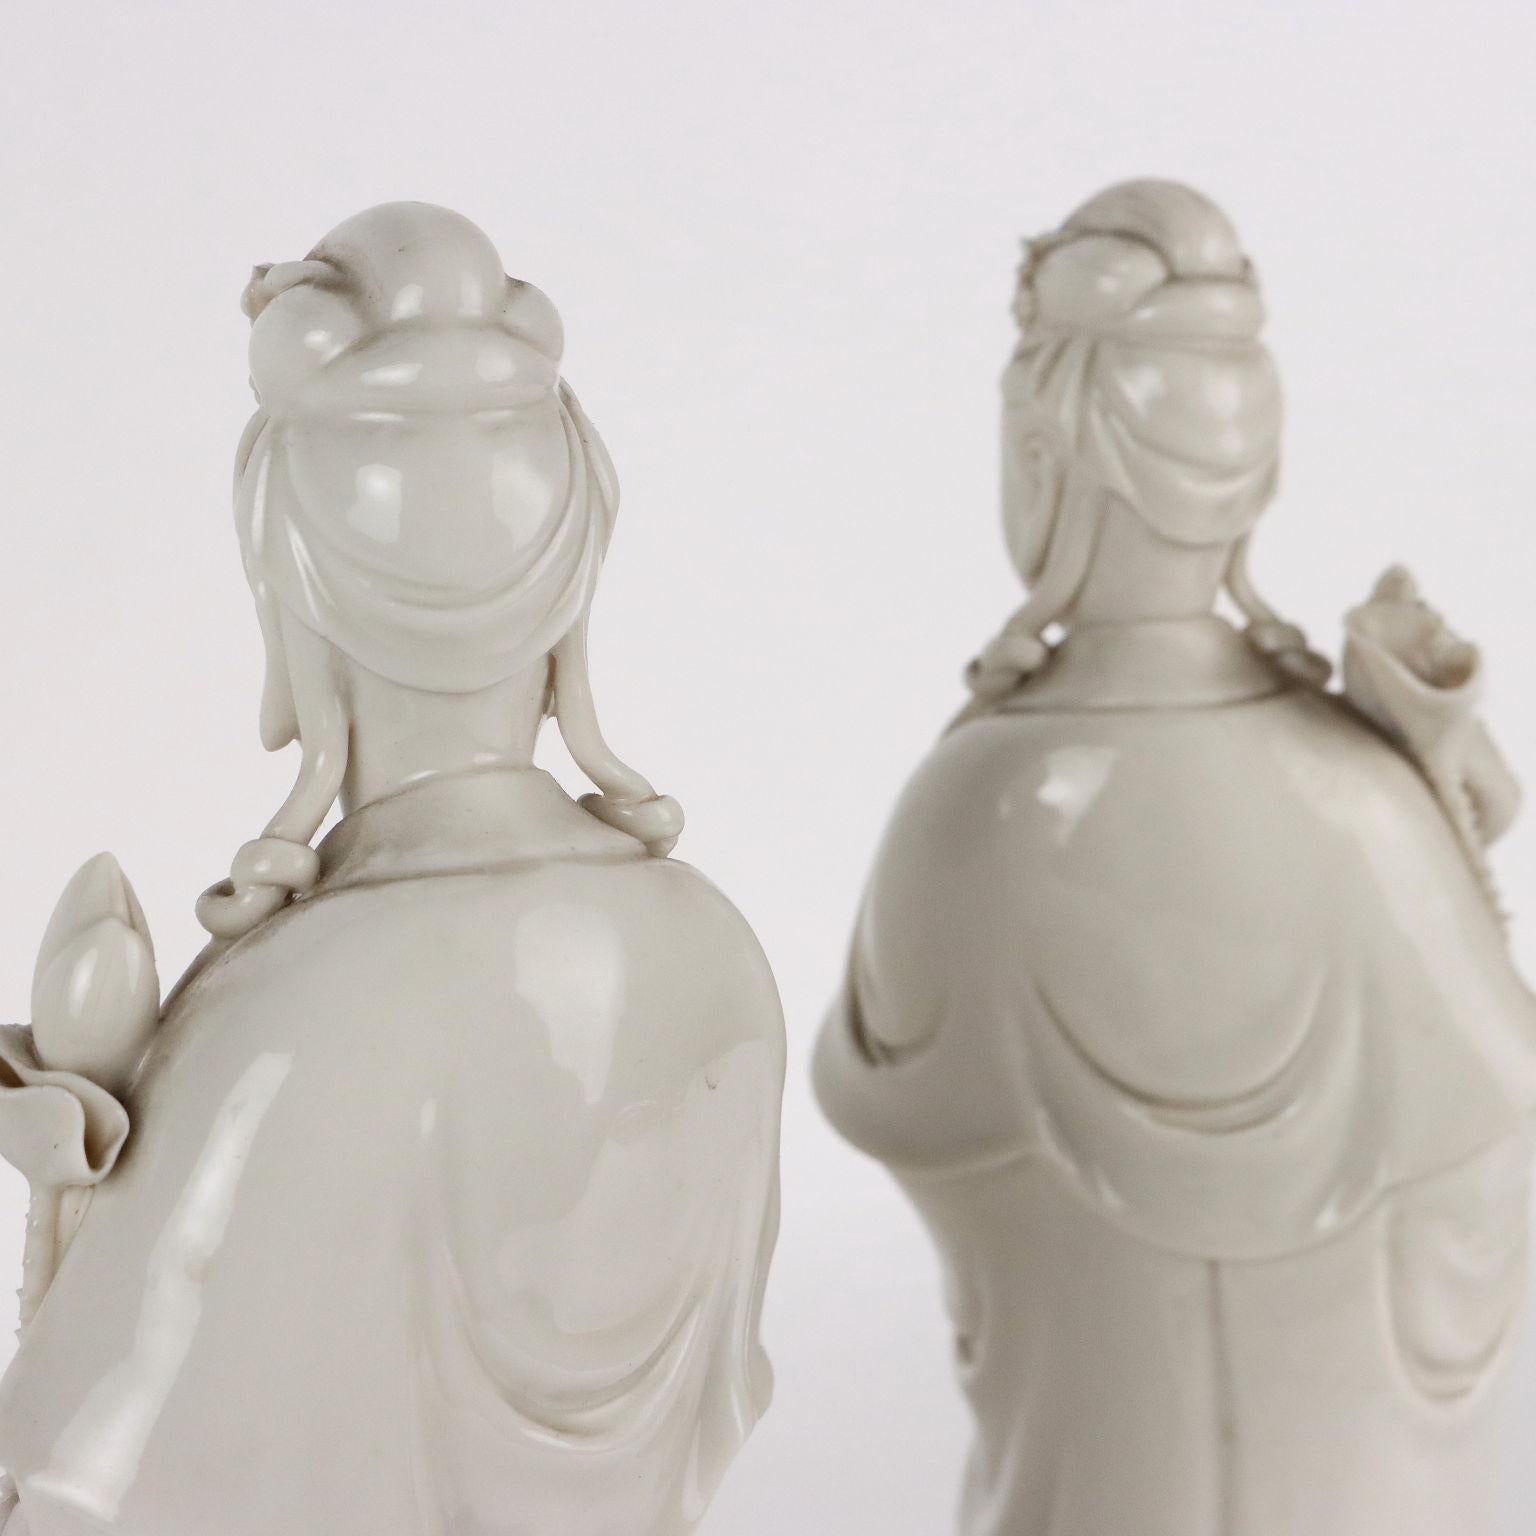 Pair of Sculptures Guanyin Ceramic China, 1912-1949 For Sale 1